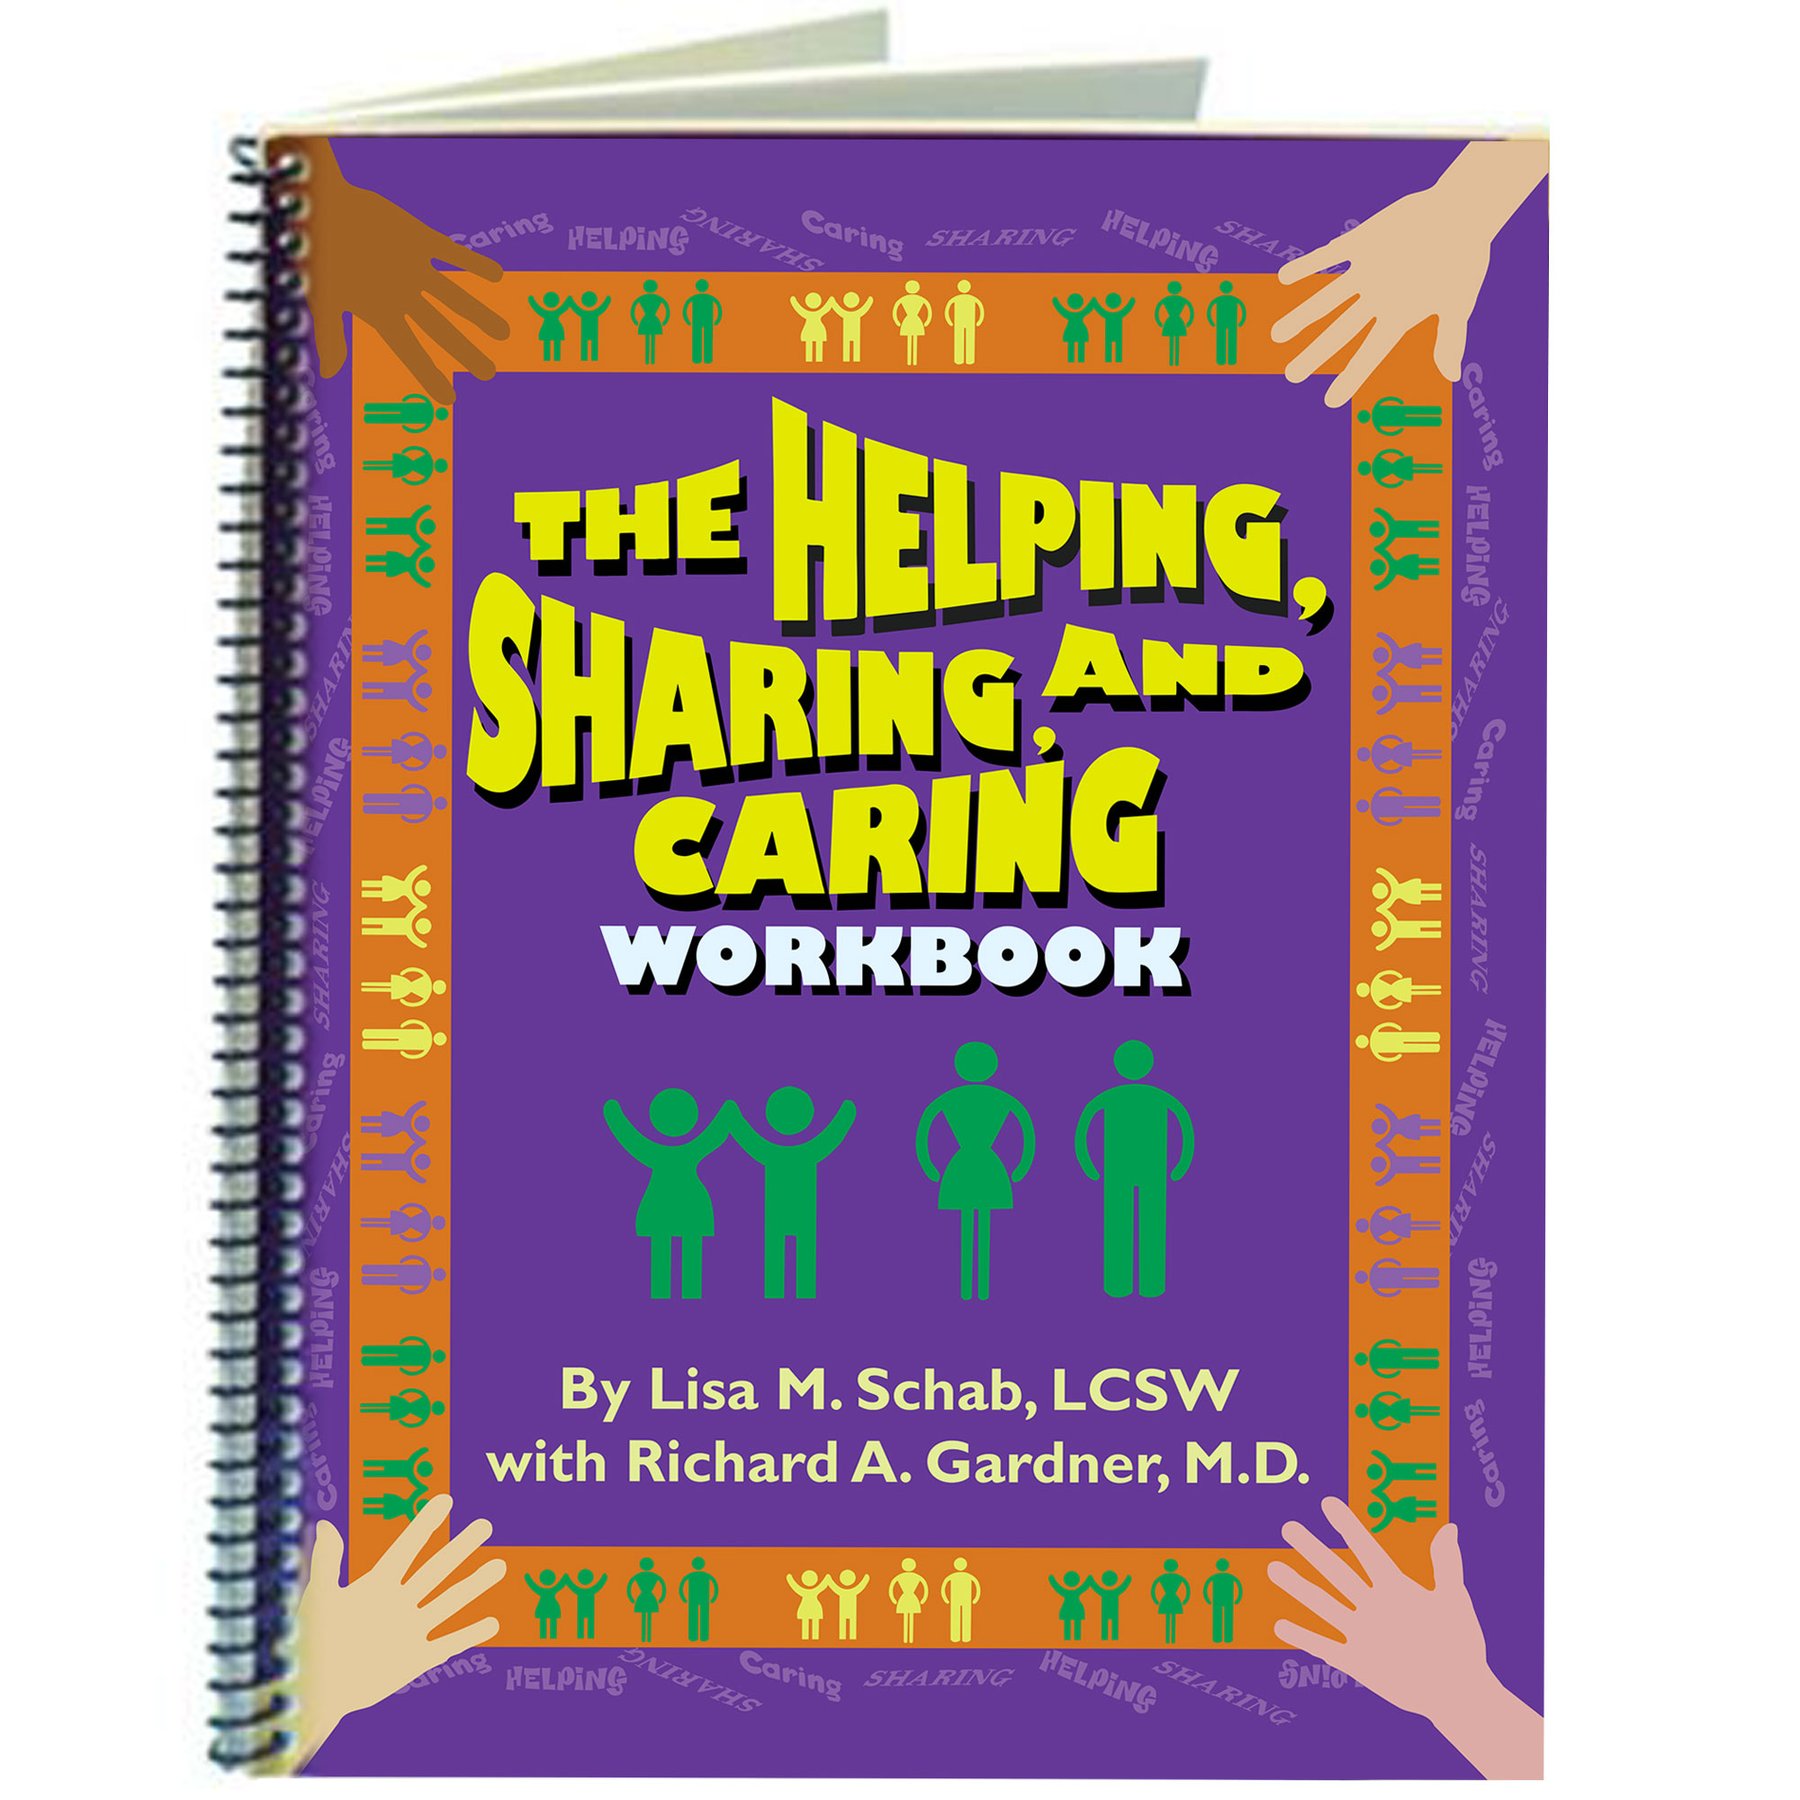 The Helping, Sharing, and Caring Workbook with CD